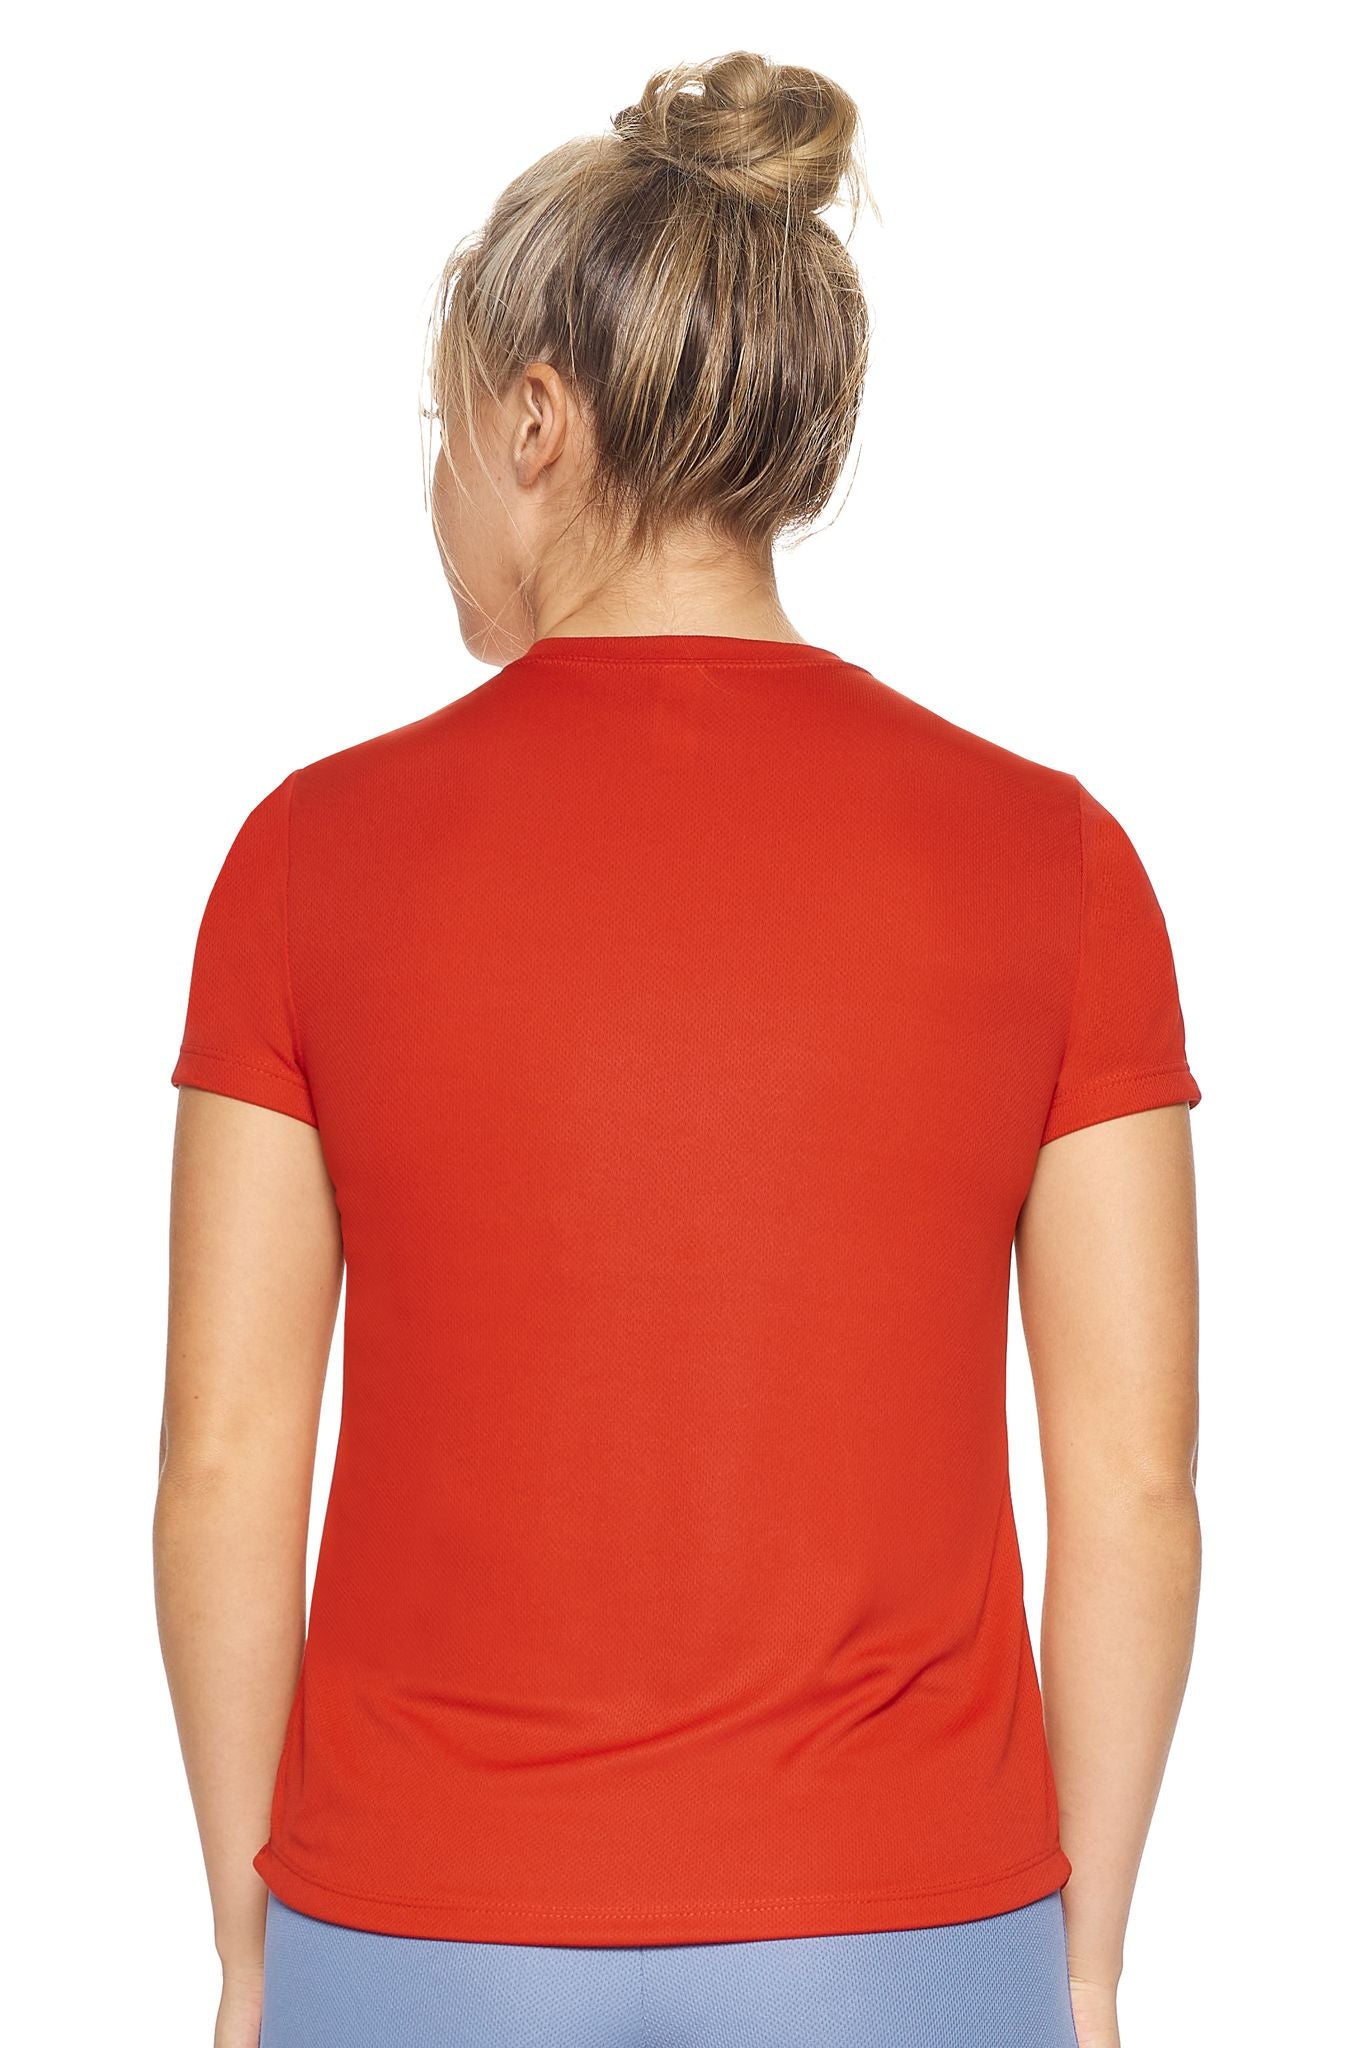 Expert Brand Retail Women's Activewear Sportswear Oxymesh Tec Tee T-shirt Made in USA red 3#color_red